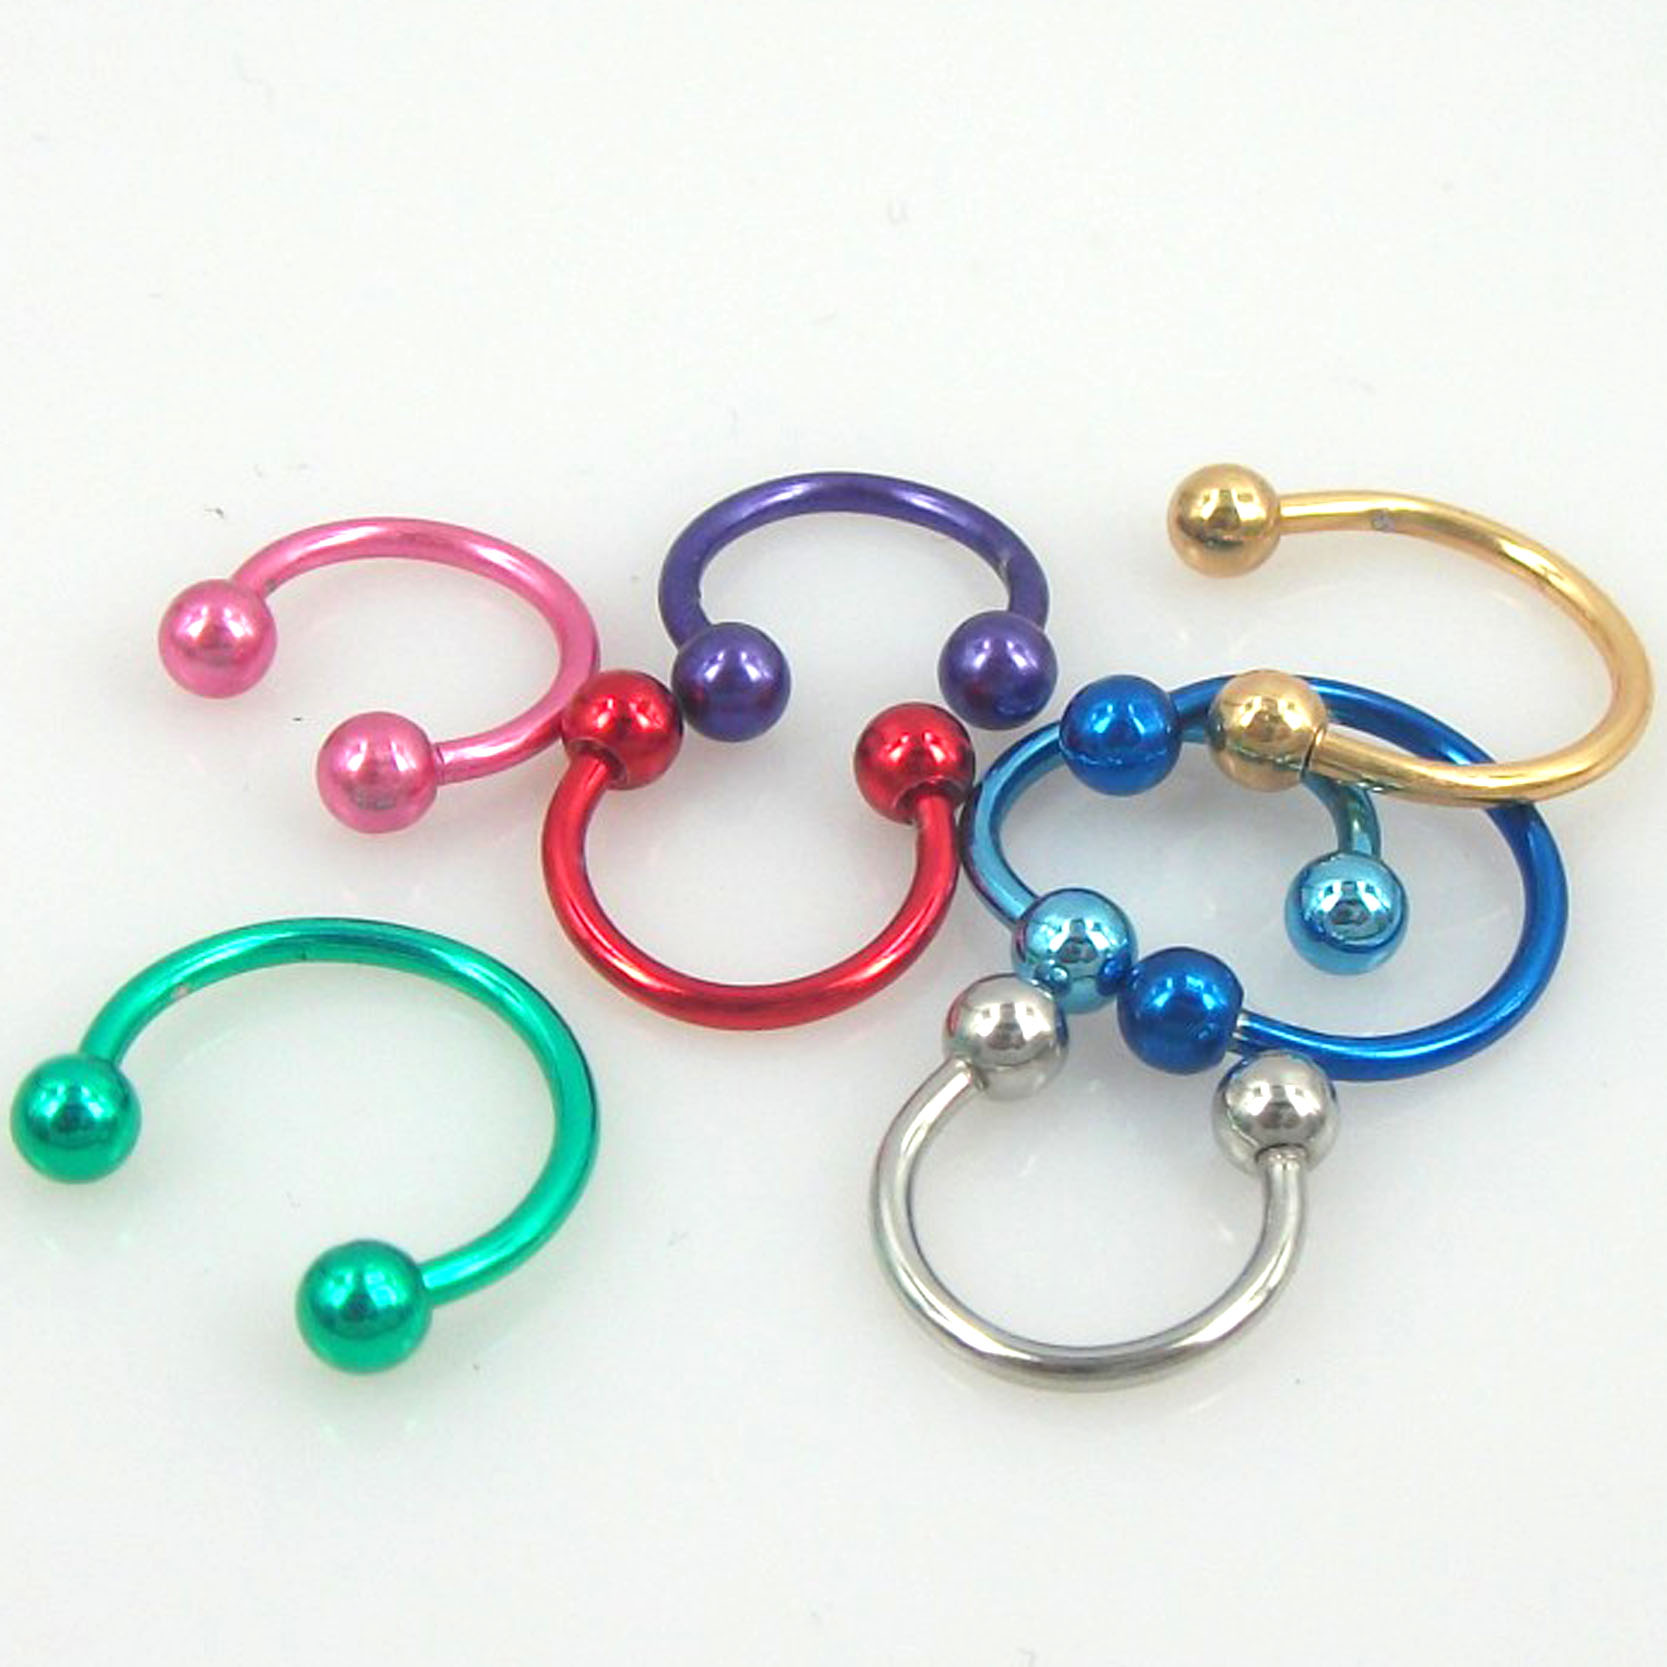 8pcs Colorful Ball Nose Ring Septum Studs Stainless Steel Hoop Body